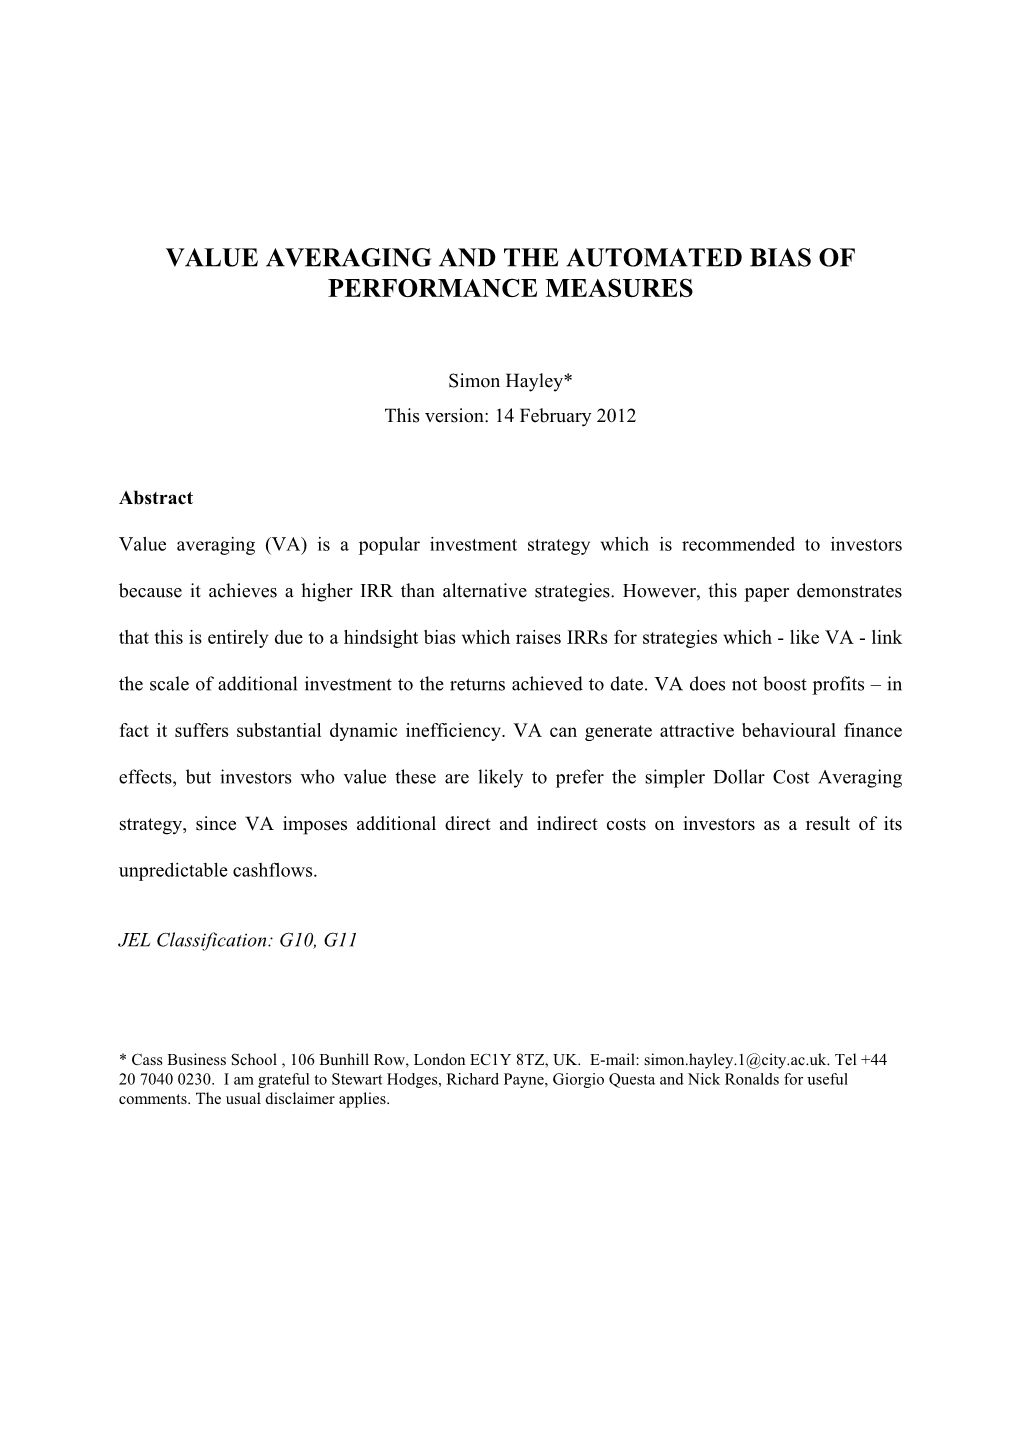 Value Averaging and the Automated Bias of Performance Measures